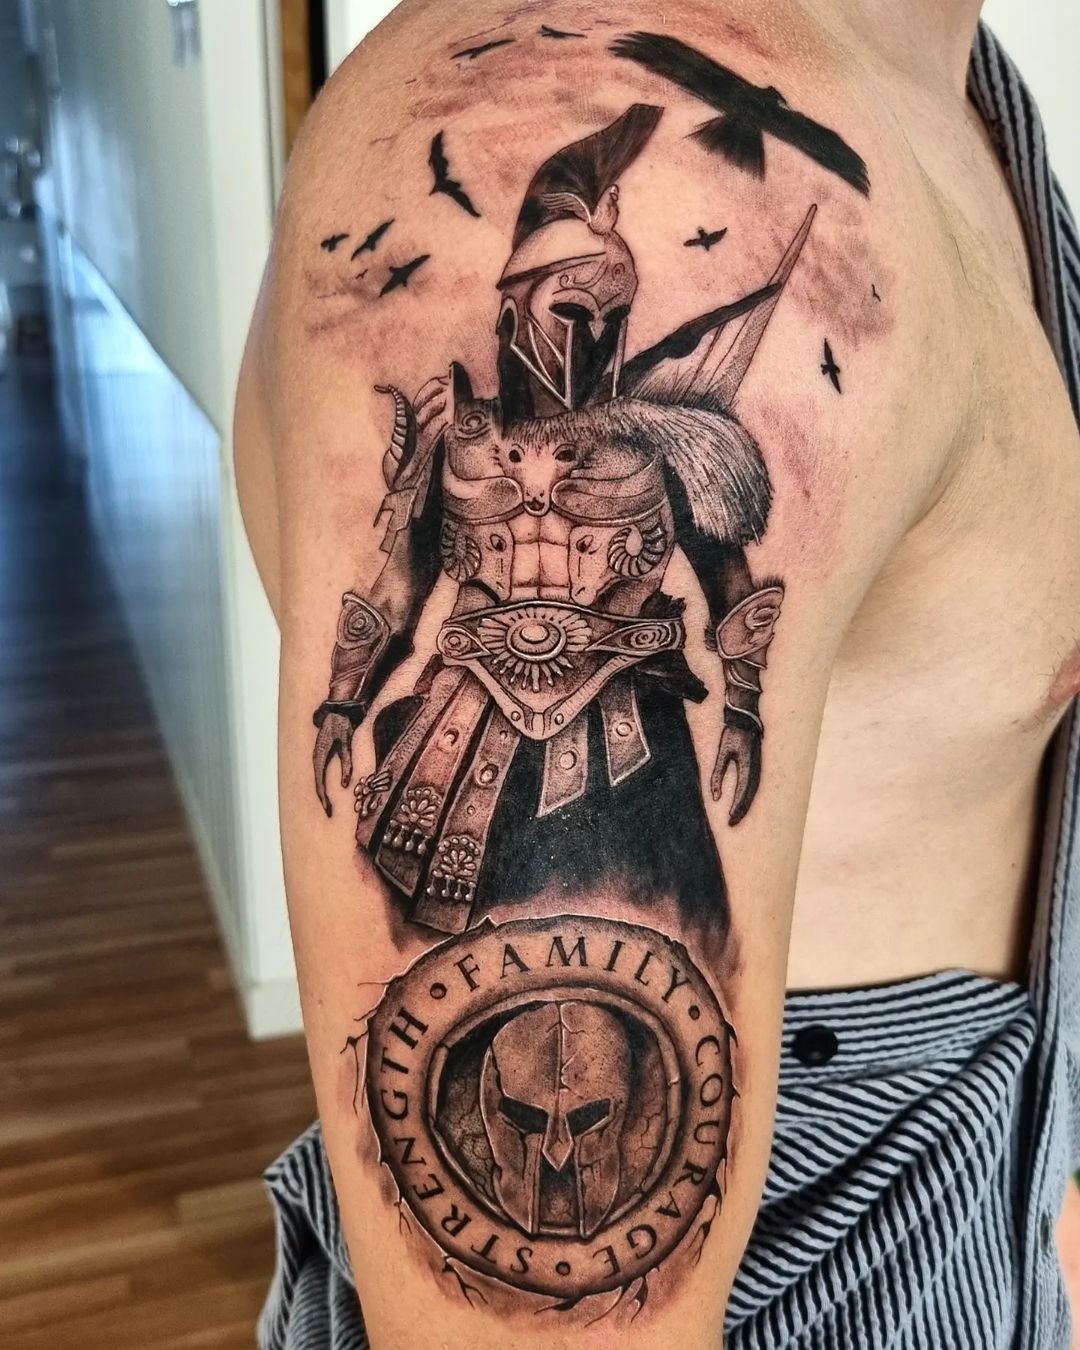 Spartan Full Sleeve Tattoo With Intricate Details